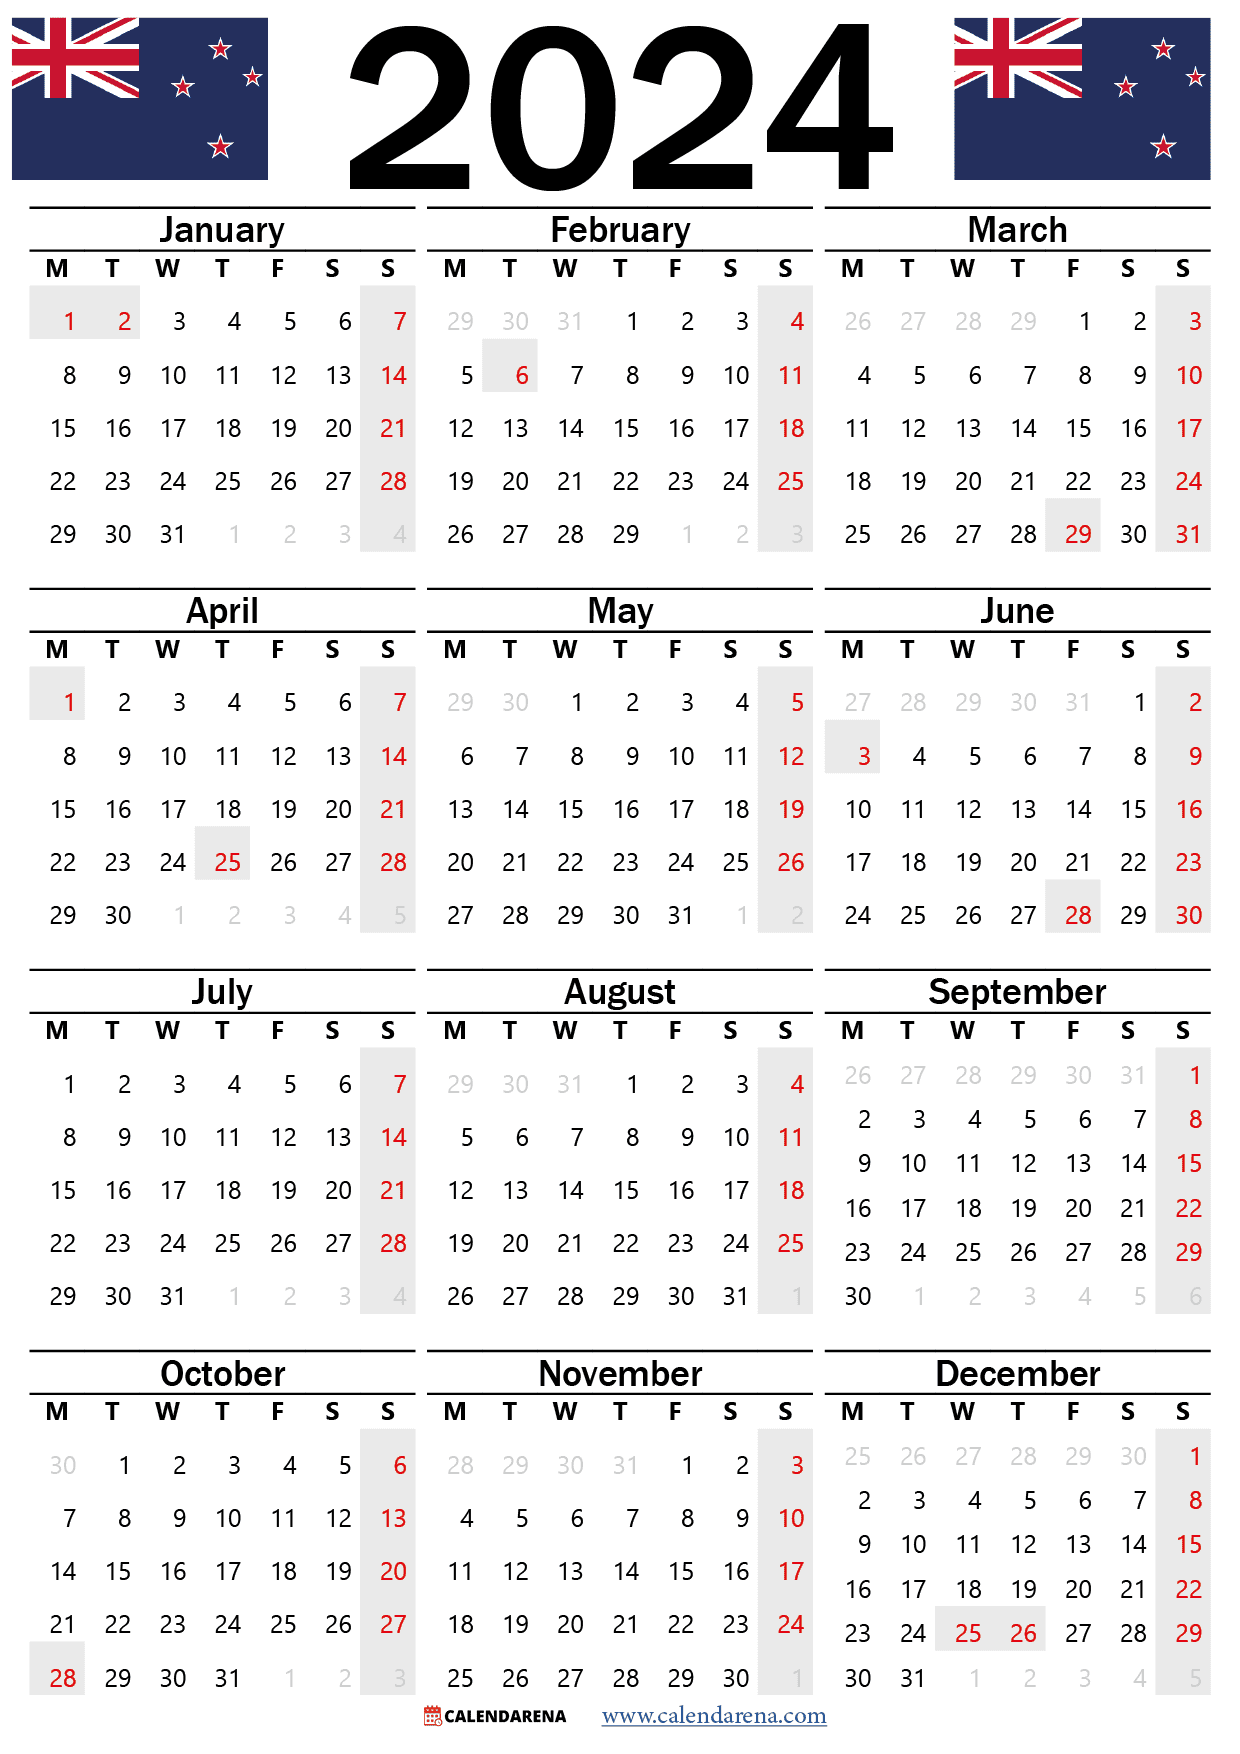 Calendar 2024 Nz With Holidays And Festivals in Free Printable Calendar 2024 Nz With Public Holidays